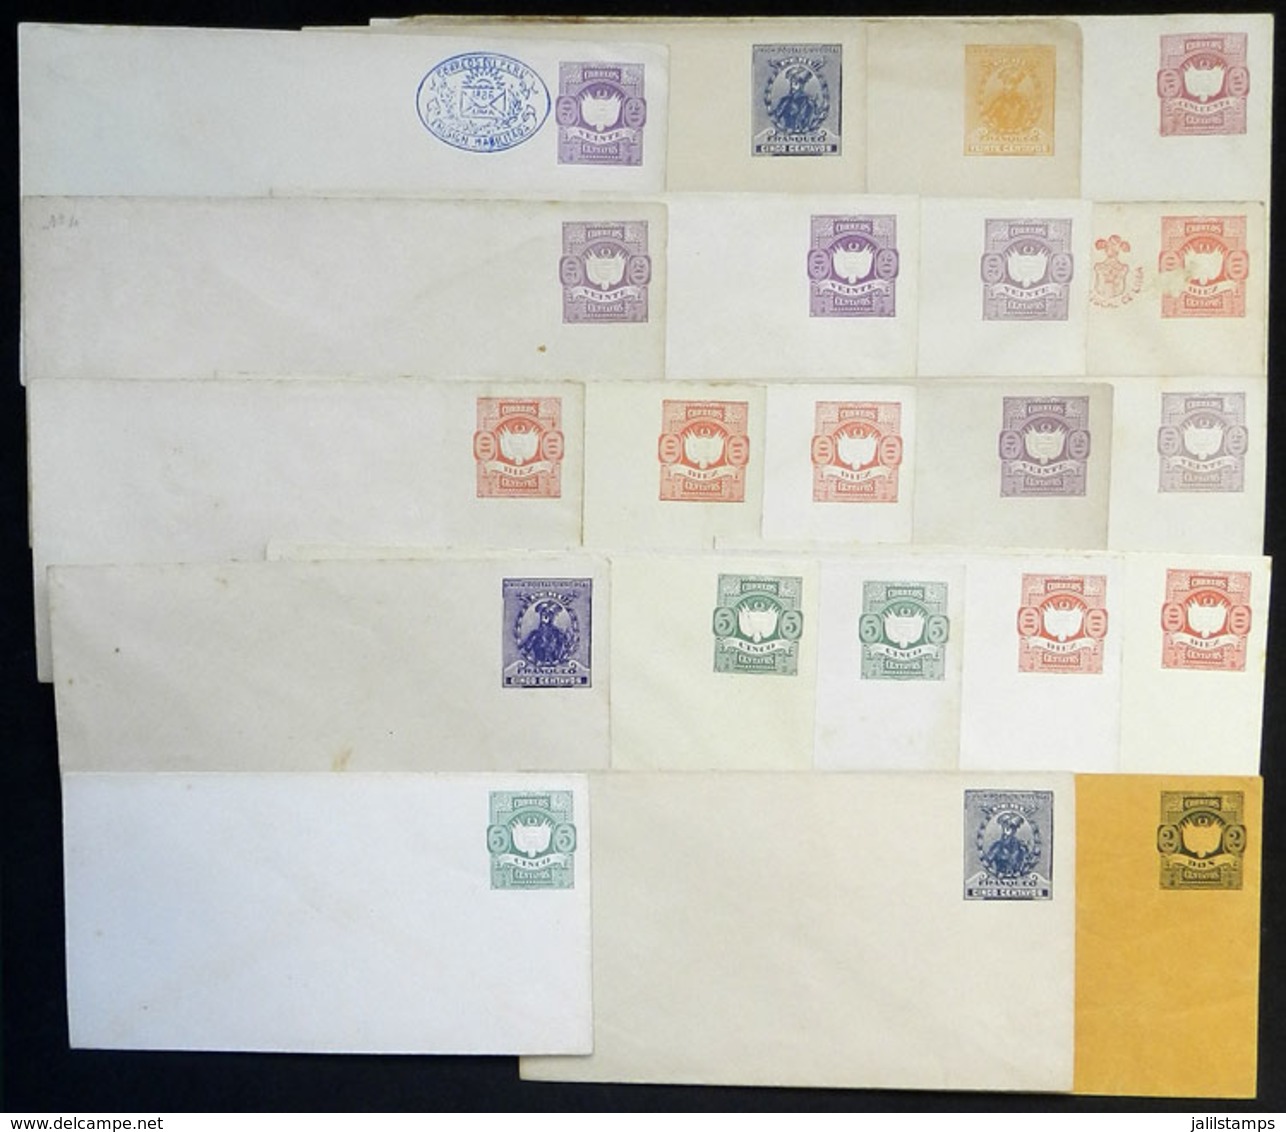 PERU: 21 Old Stationery Envelopes, Fine To Very Fine General Quality (a Couple With Minor Defect), Interesting! - Perú